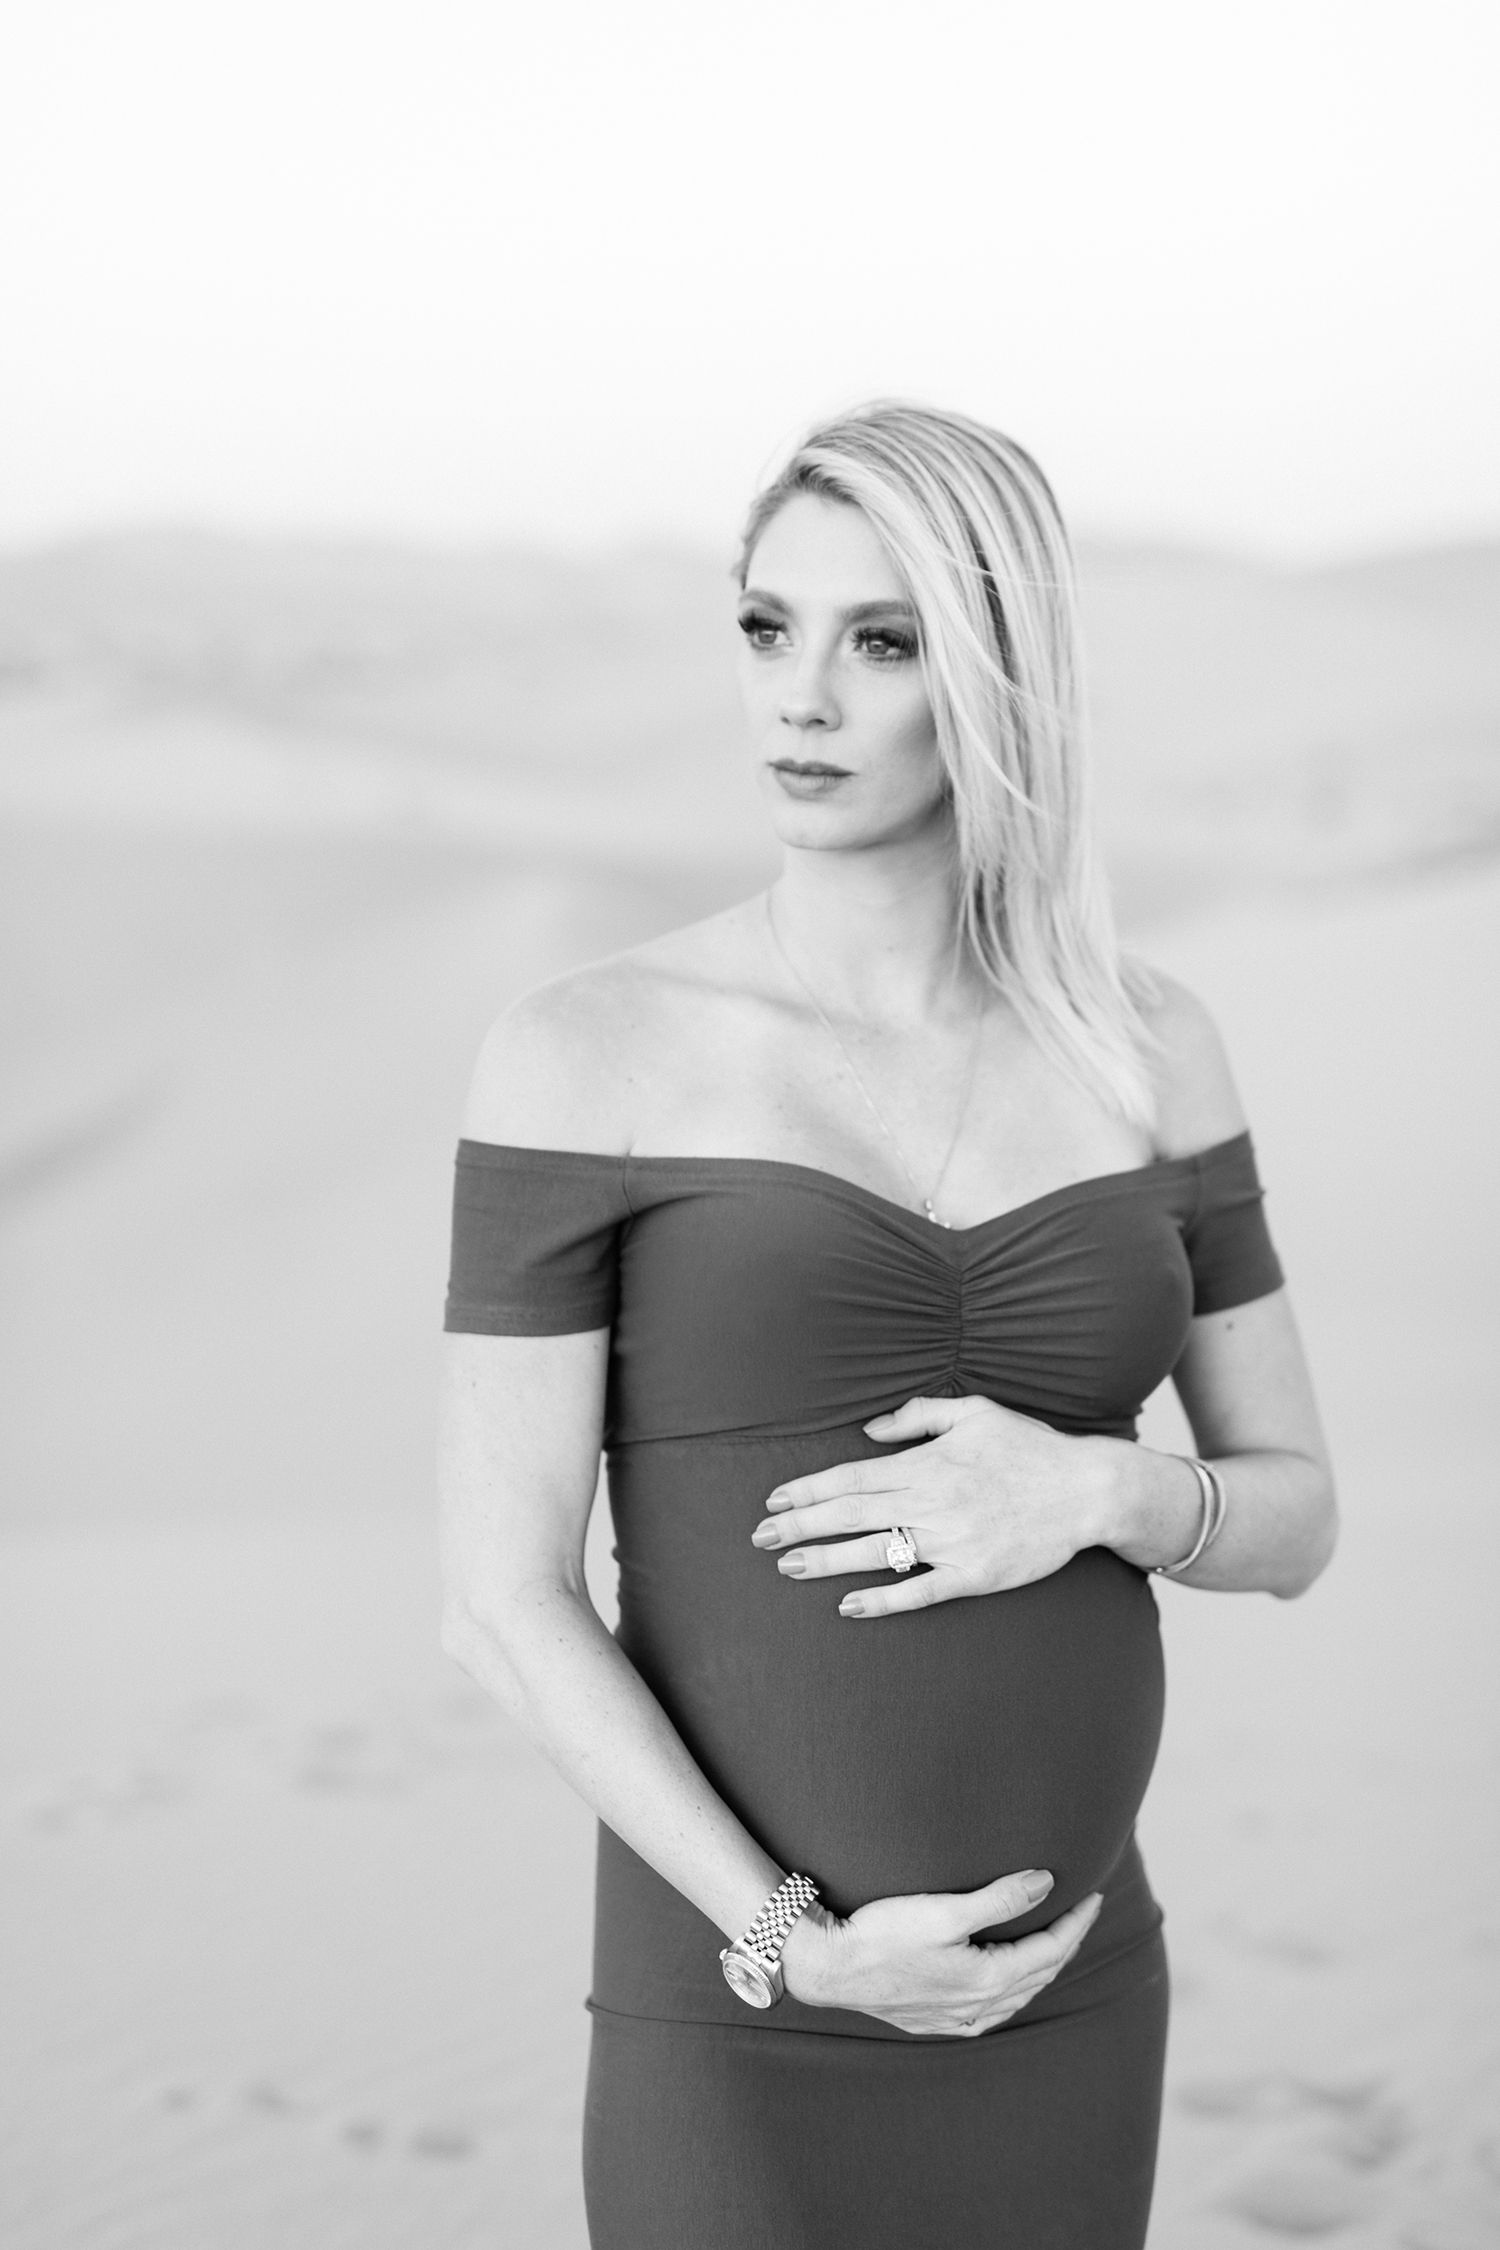 A stunning maternity portrait shoot in the beautiful Glamis Sand Dunes in California. More on the on the blog! #MaternityPhotography #MaternityPictures #MaternityPhotographyPoses #MaternityPhotographyIdeas #MaternityOutfits #MaternityDresses #MaternityPortraits #MaternityDesertPhotoshoot #MaternitySandDunes #CaliforniaMaternityStyle #BumpPhotoshoot #BumPhotoshootIdeas #CaliforniaPhotographer #GlamisSandDunes #GlamisSandDunesPhotoShoot #CaliforniaPhotographer